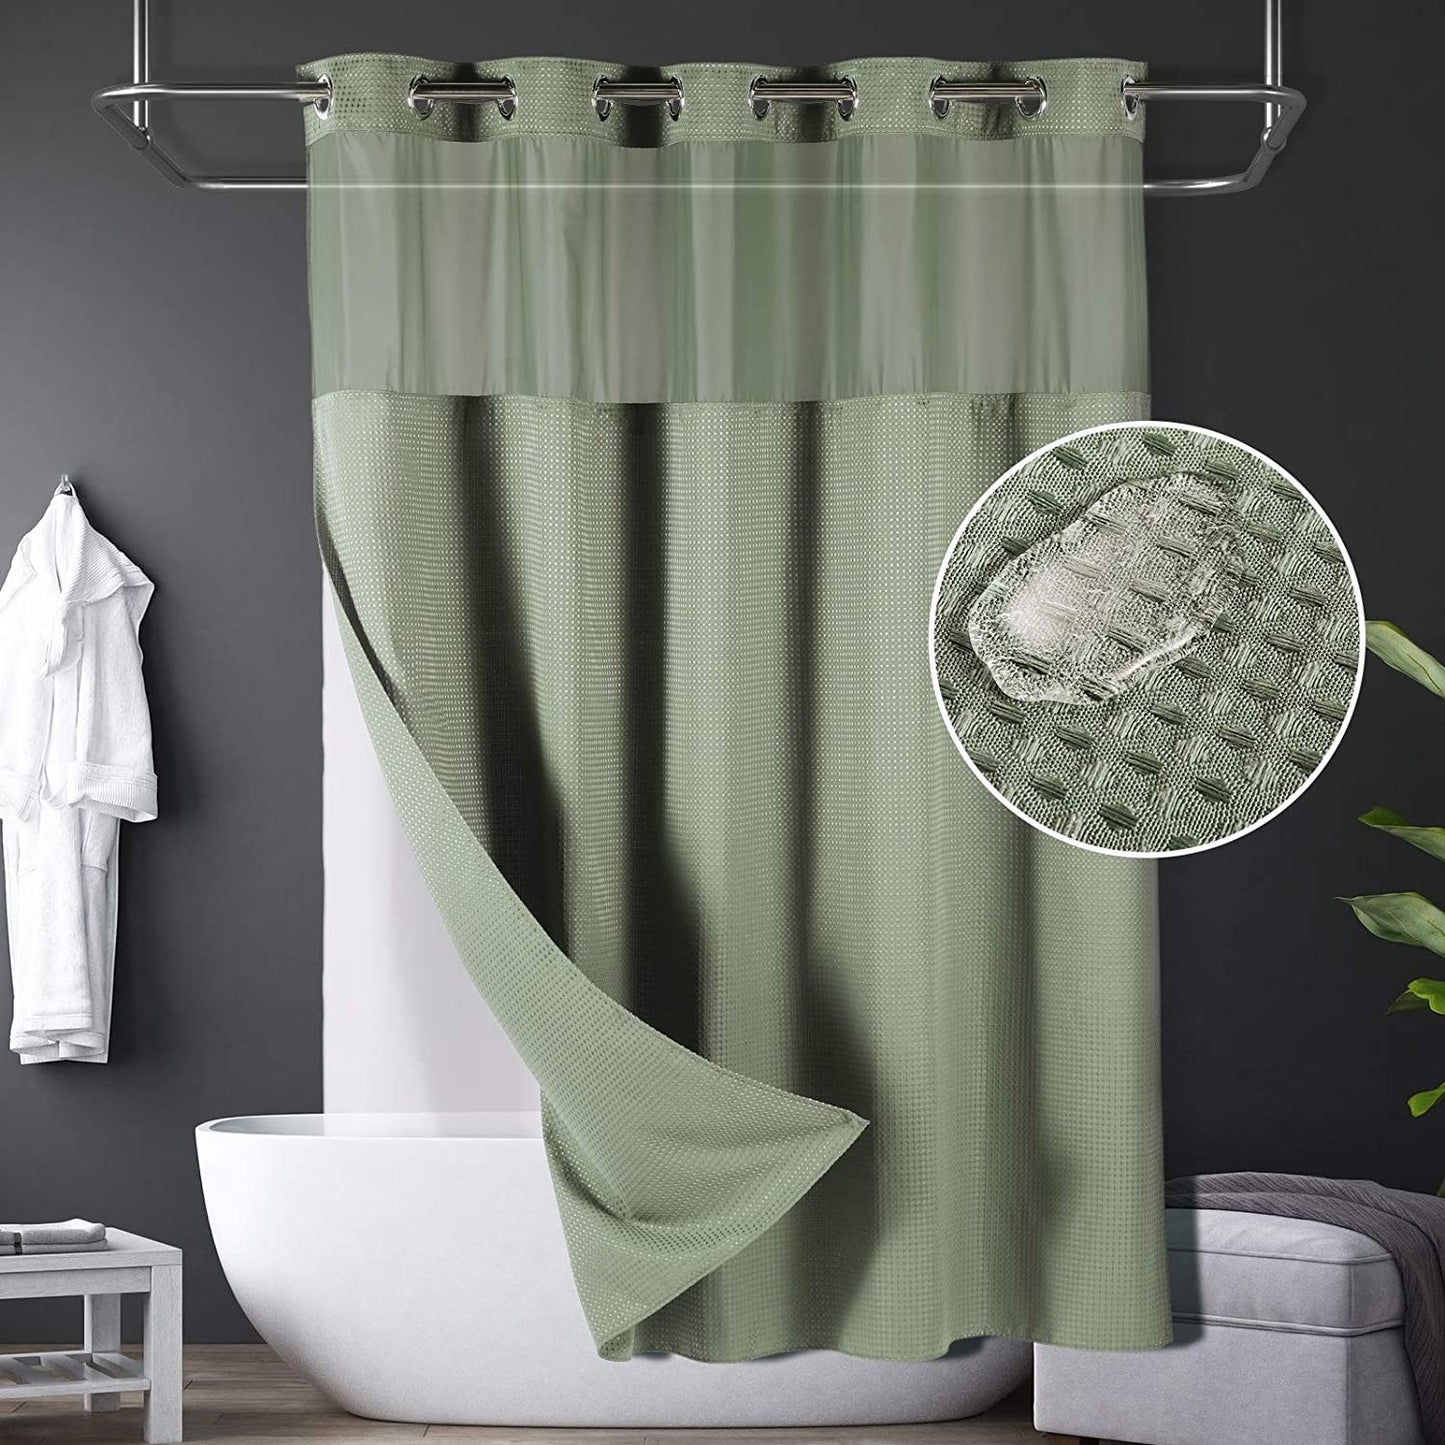 SnapHook Waffle Weave Fabric Shower Curtain with Snap-in Liner | 71WX78L, Sage Green